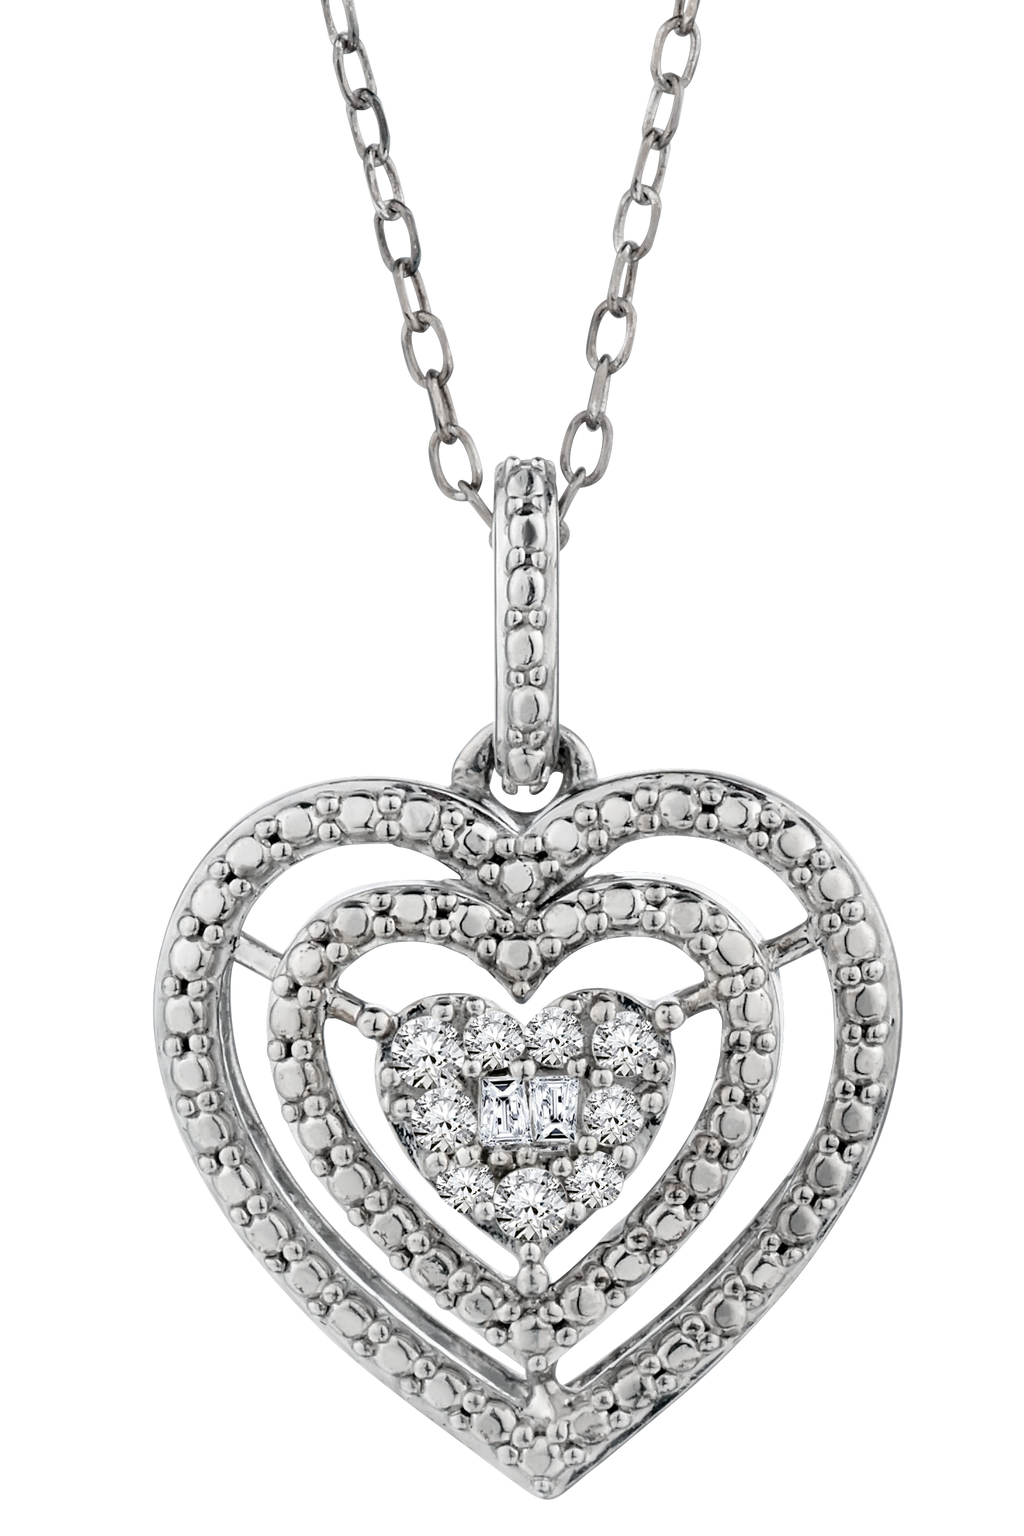 .33 Carat of Diamonds Heart Earrings and Pendant Set, Silver.....................NOW